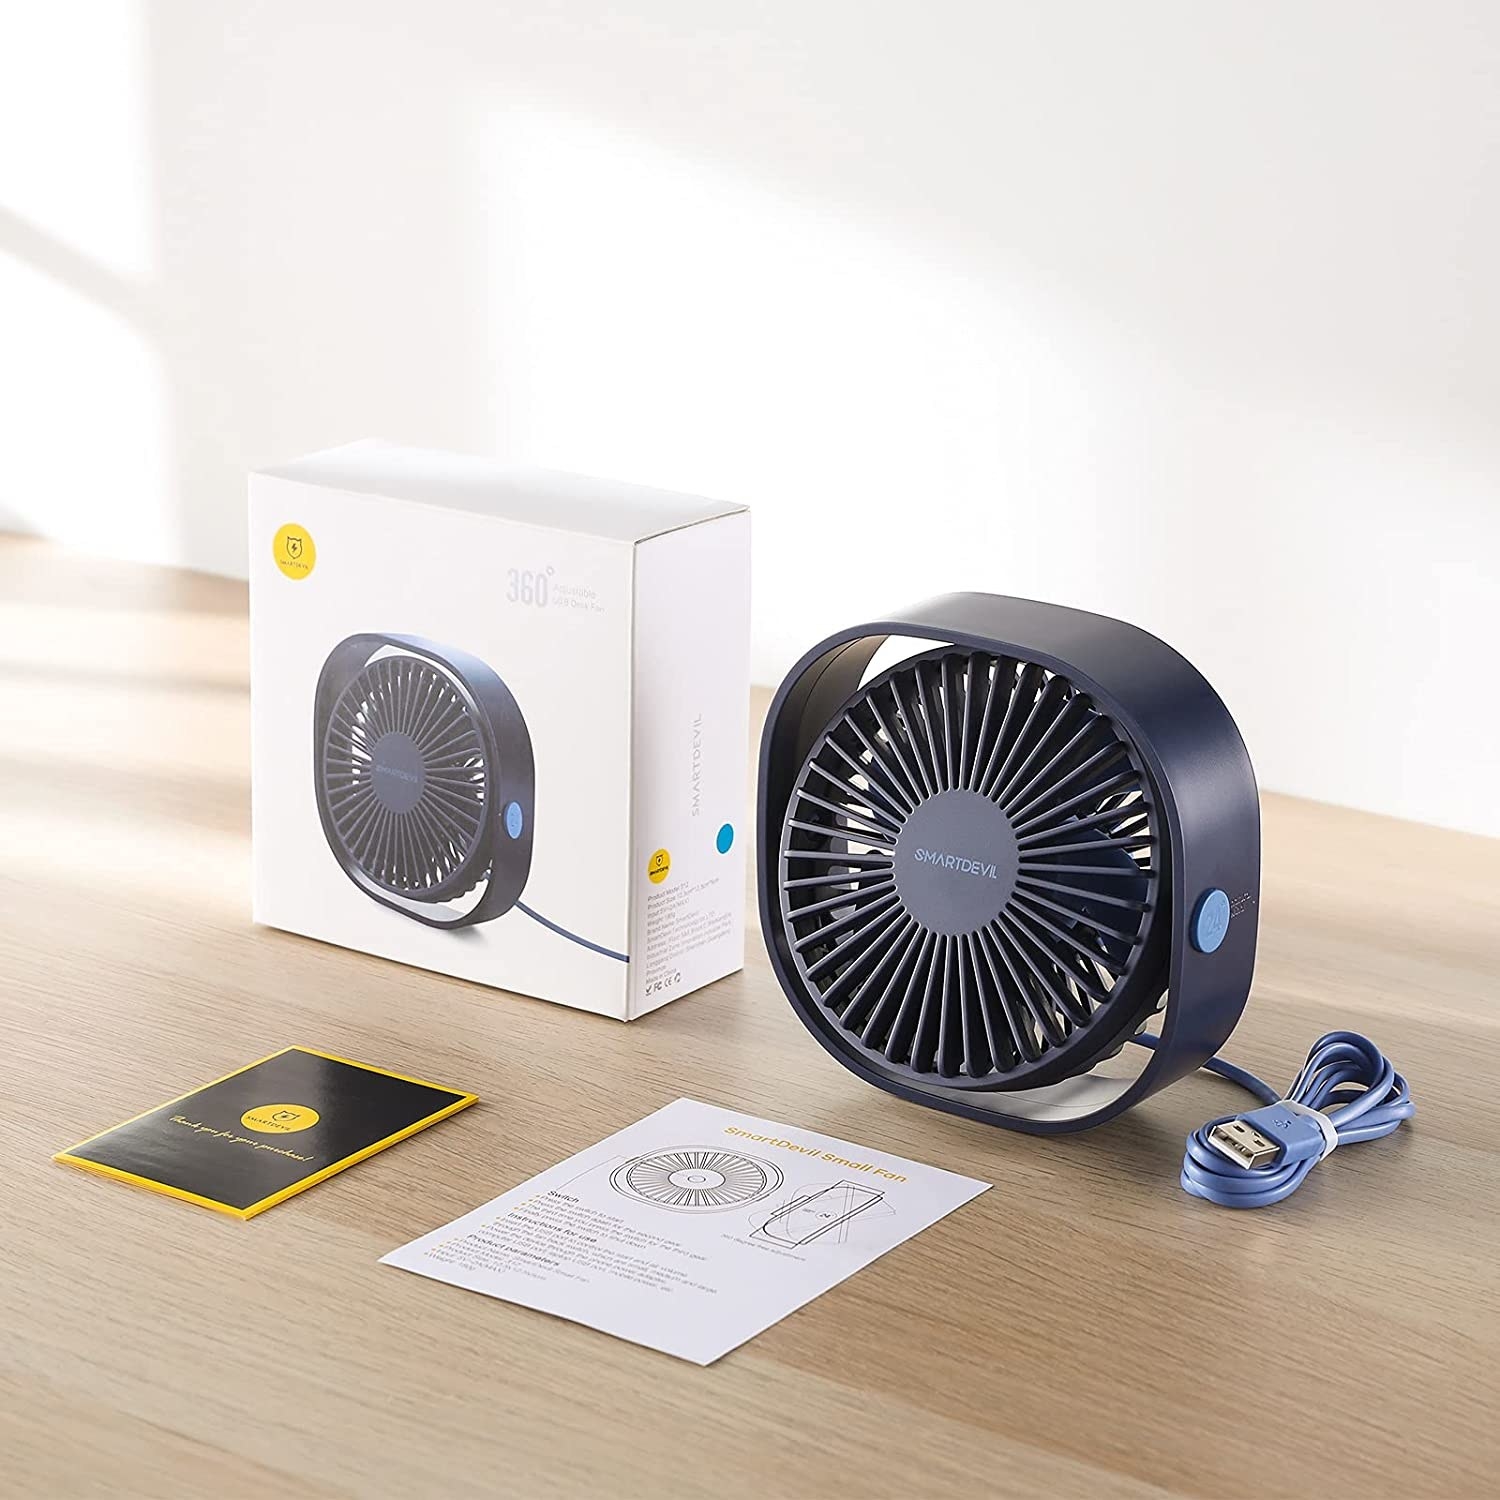 A USB desk fan on the table next to the box and an instruction manual